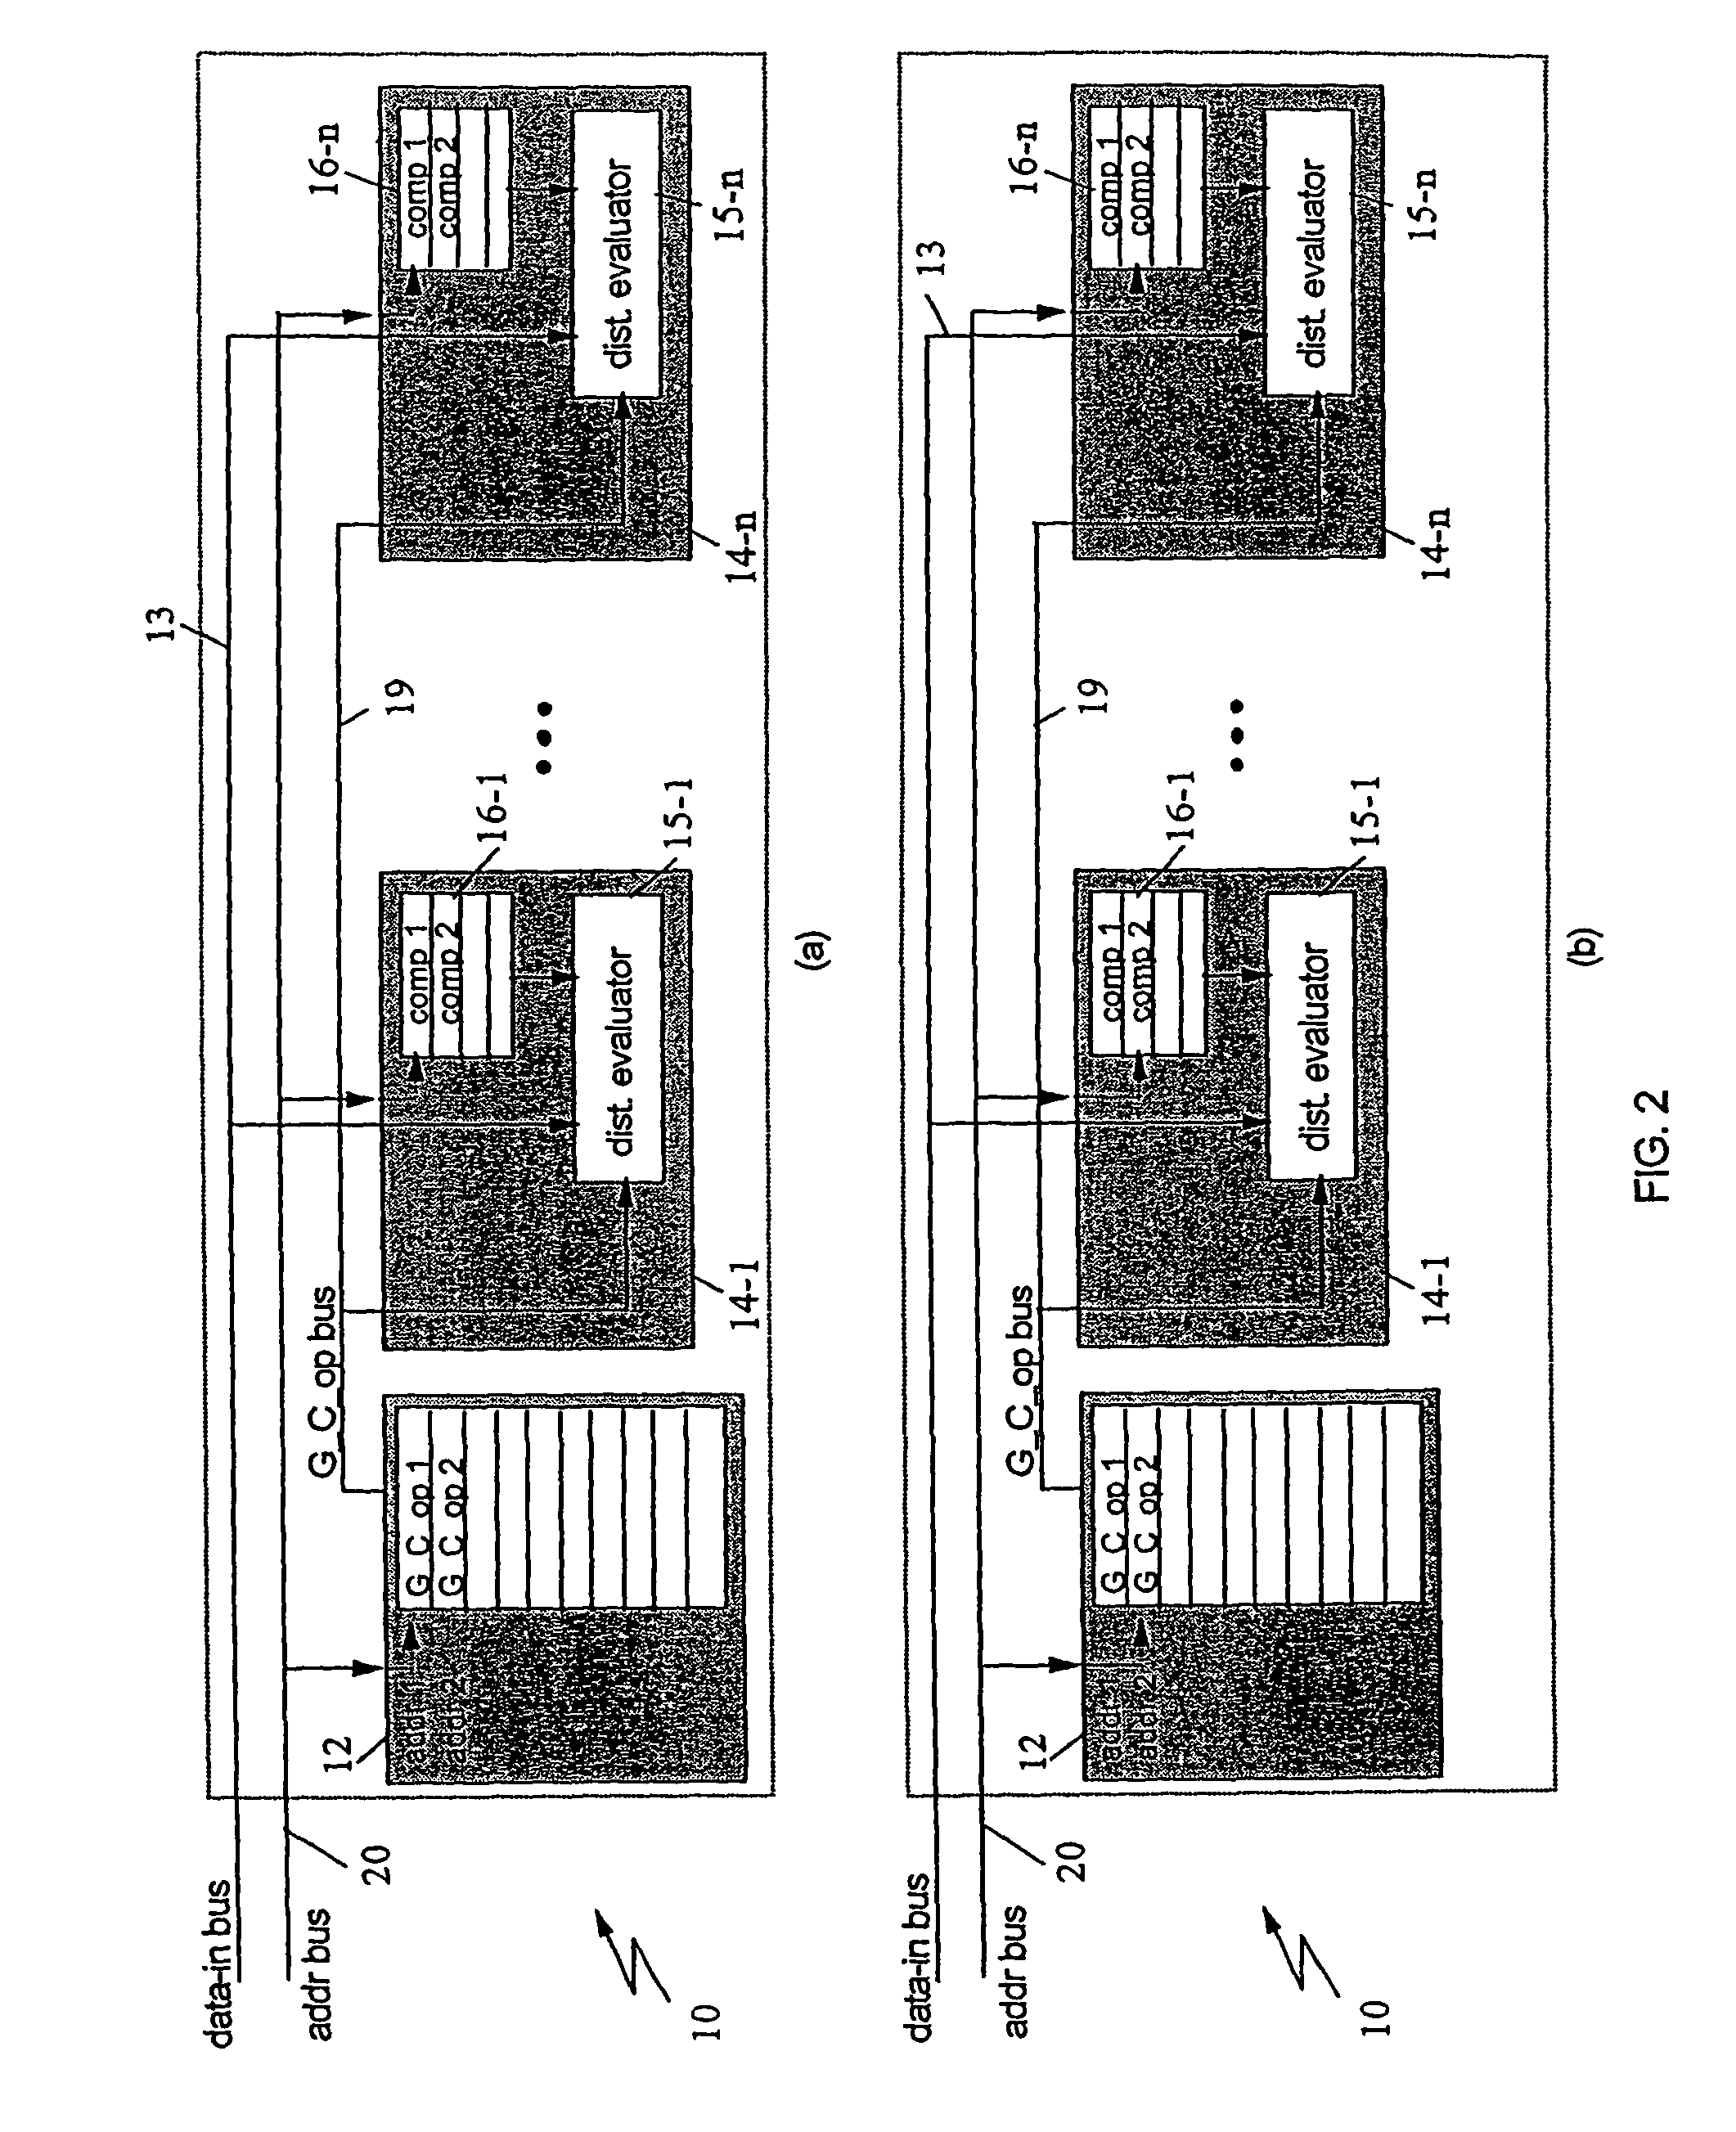 Method and circuits for associating a complex operator to each component of an input pattern presented to an artificial neural network